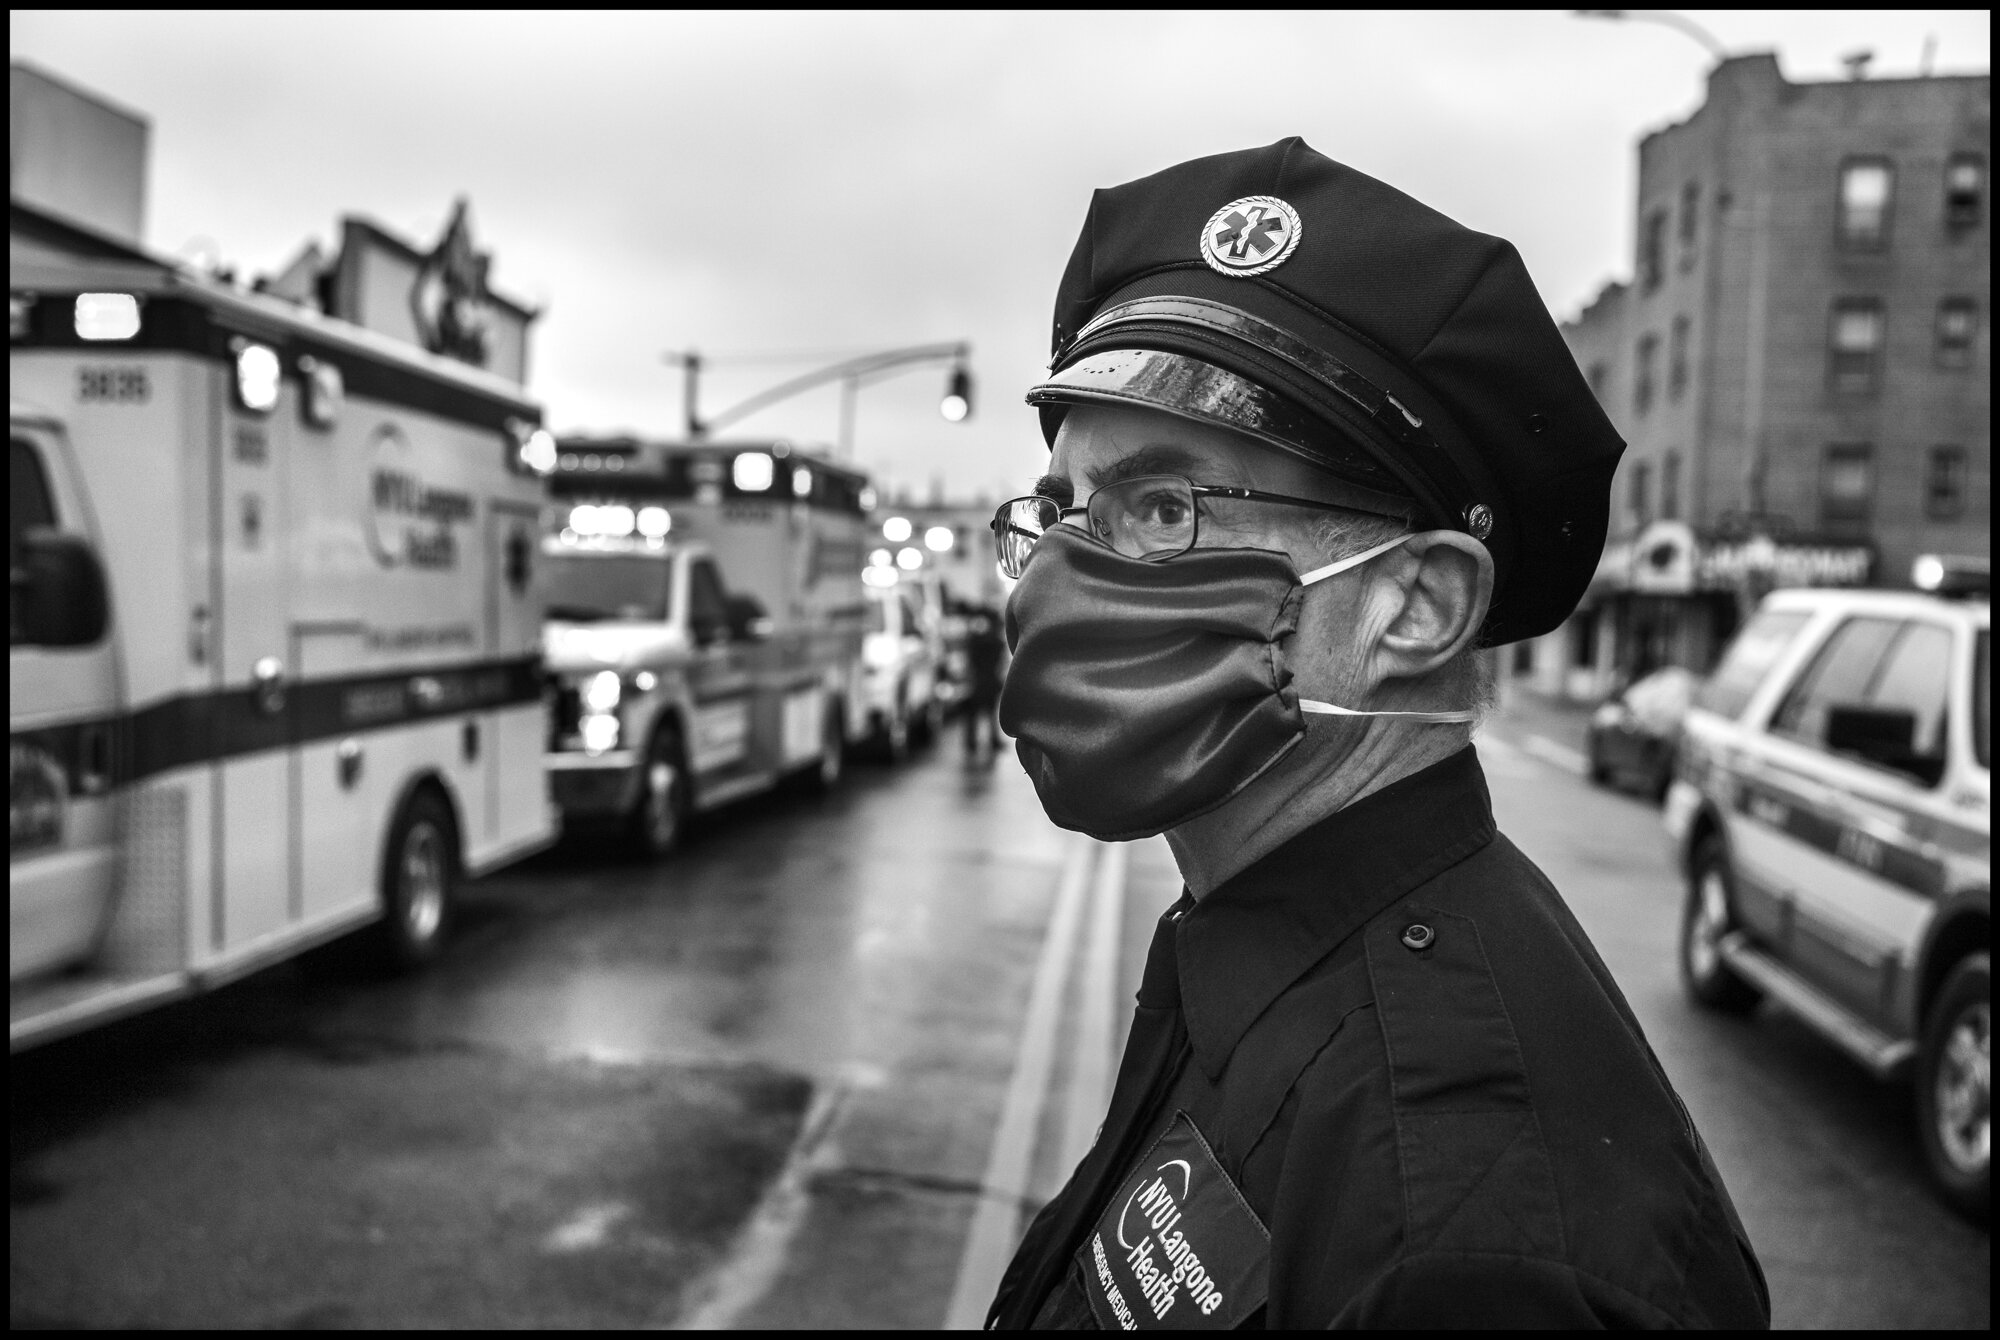  A funeral ceremony for Anthony “Tony” Thomas-a legendary Paramedic in the New York City area, who died of Covid-19 related causes. Bay Ridge, Brooklyn, New York.  April 30, 2020. © Peter Turnley.   ID# 32-014 